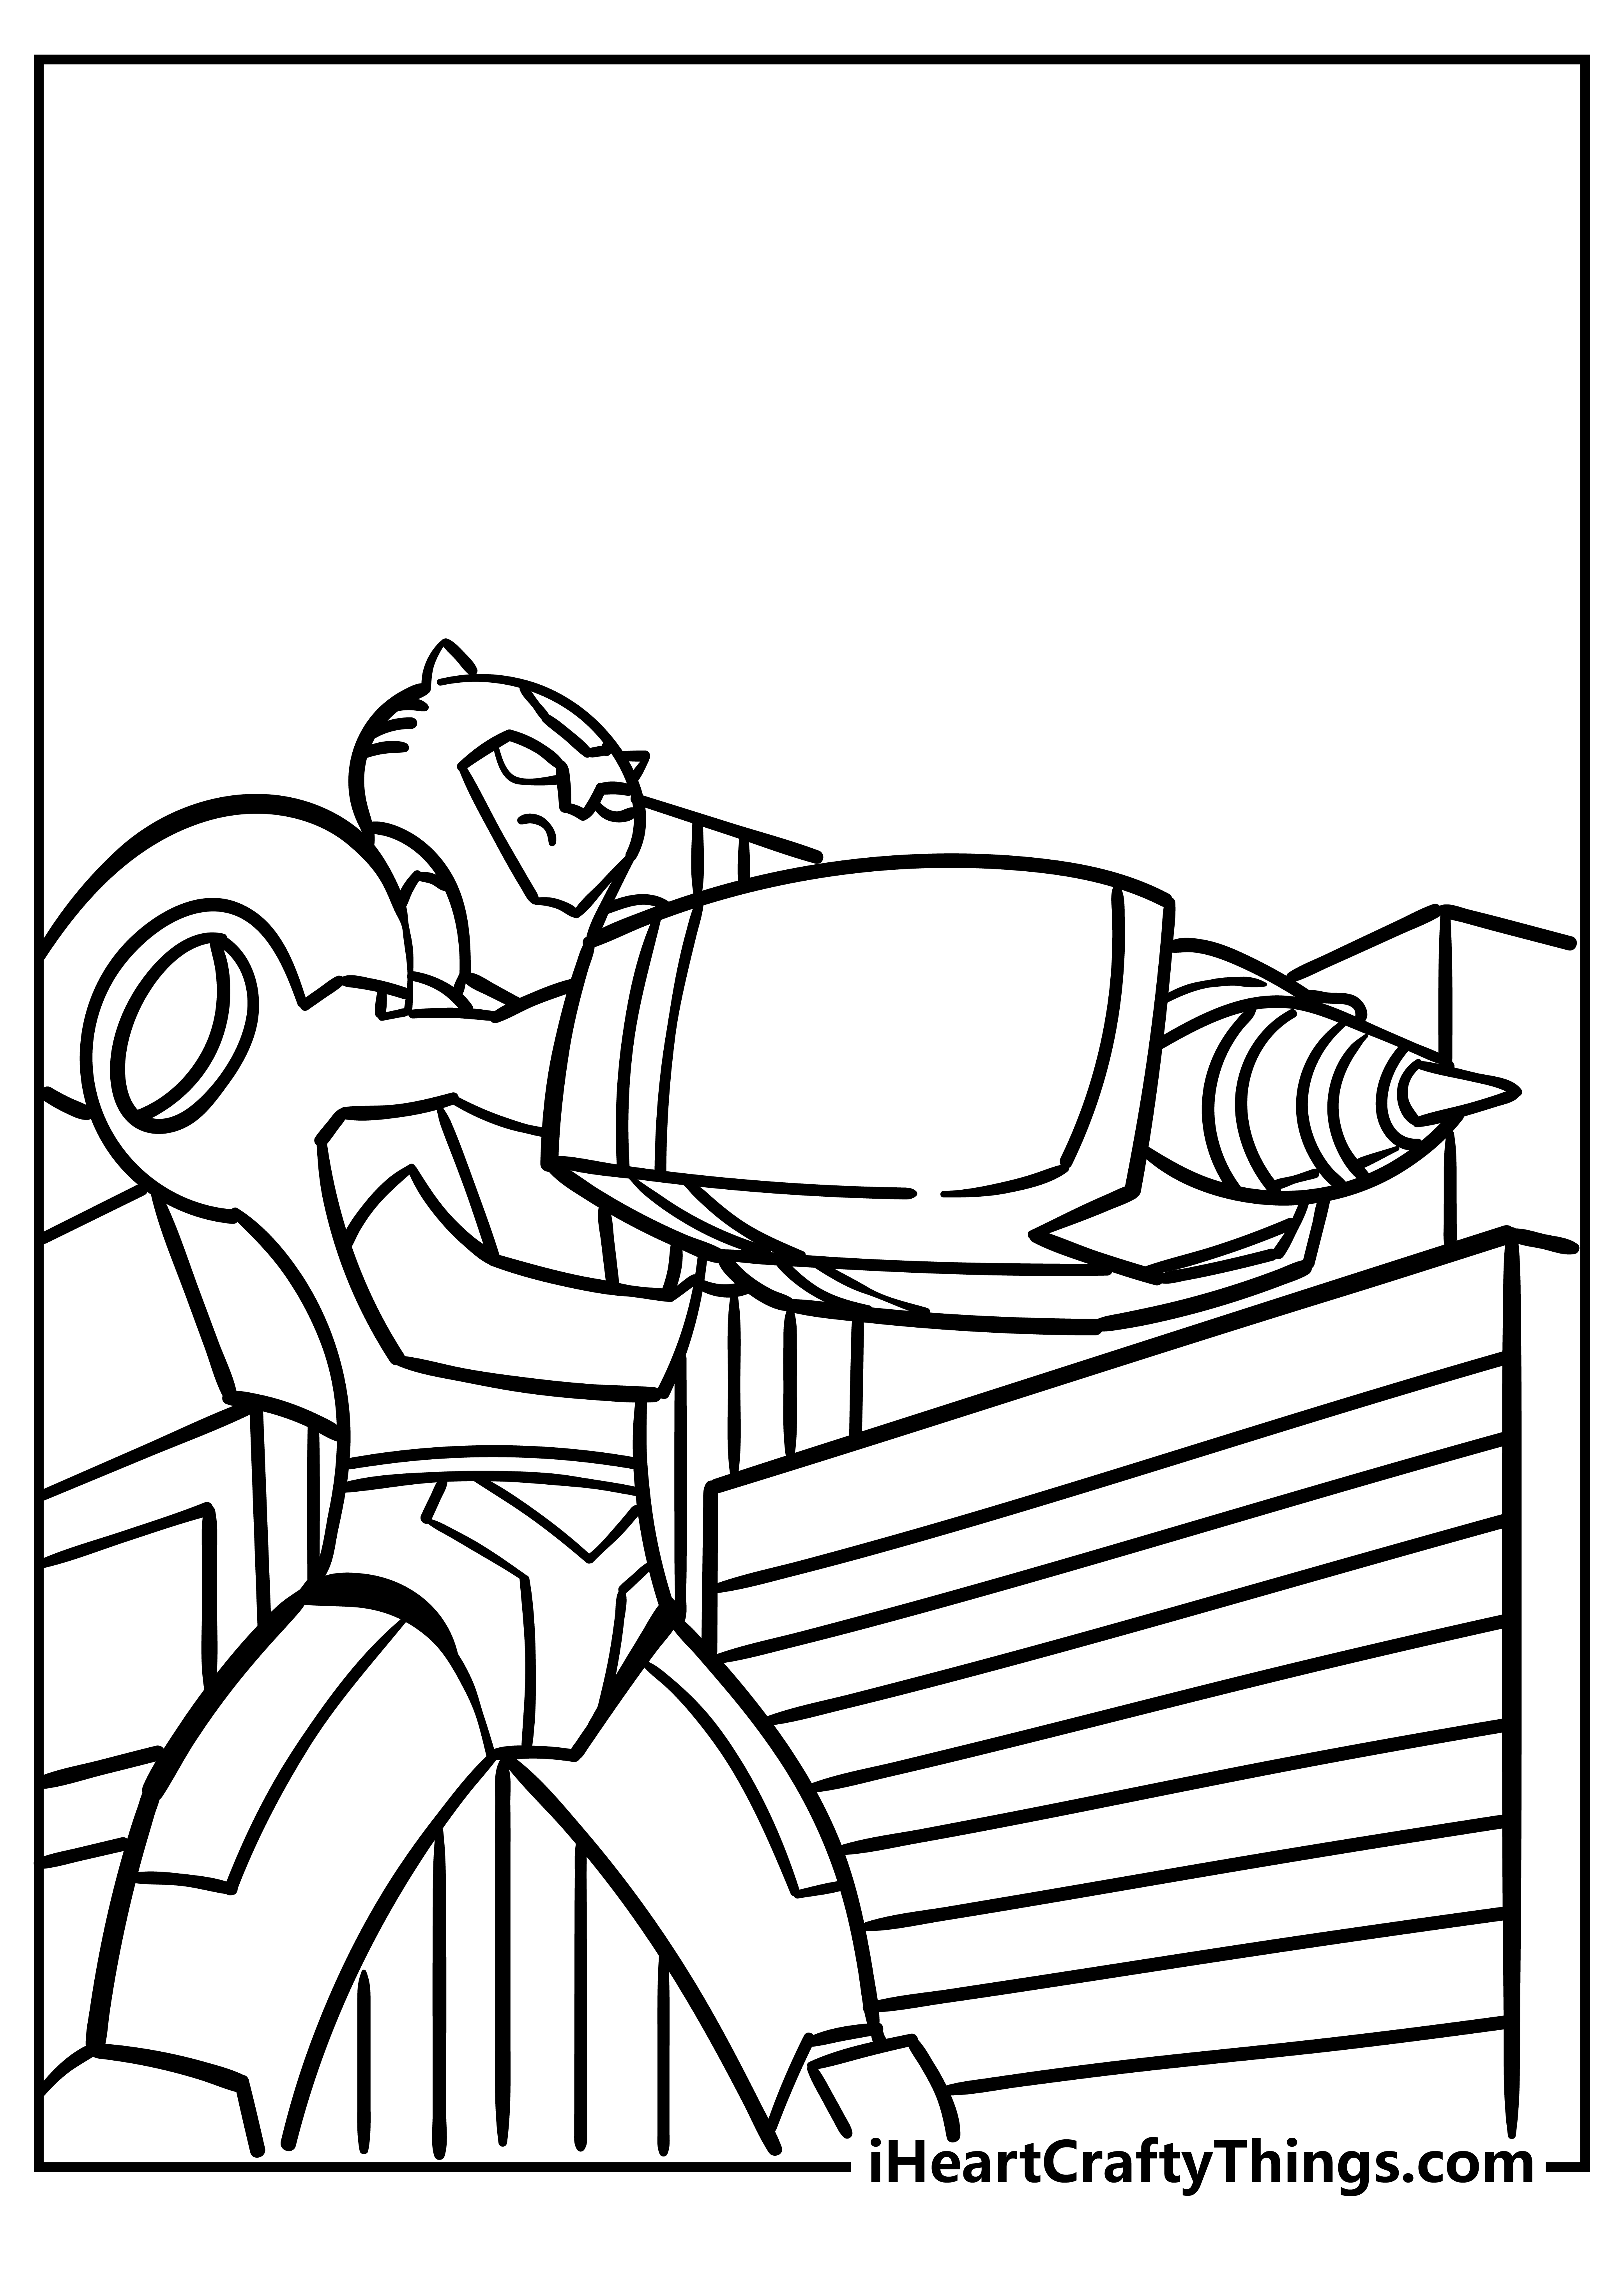 Bumblebee Coloring Pages for adults free printable